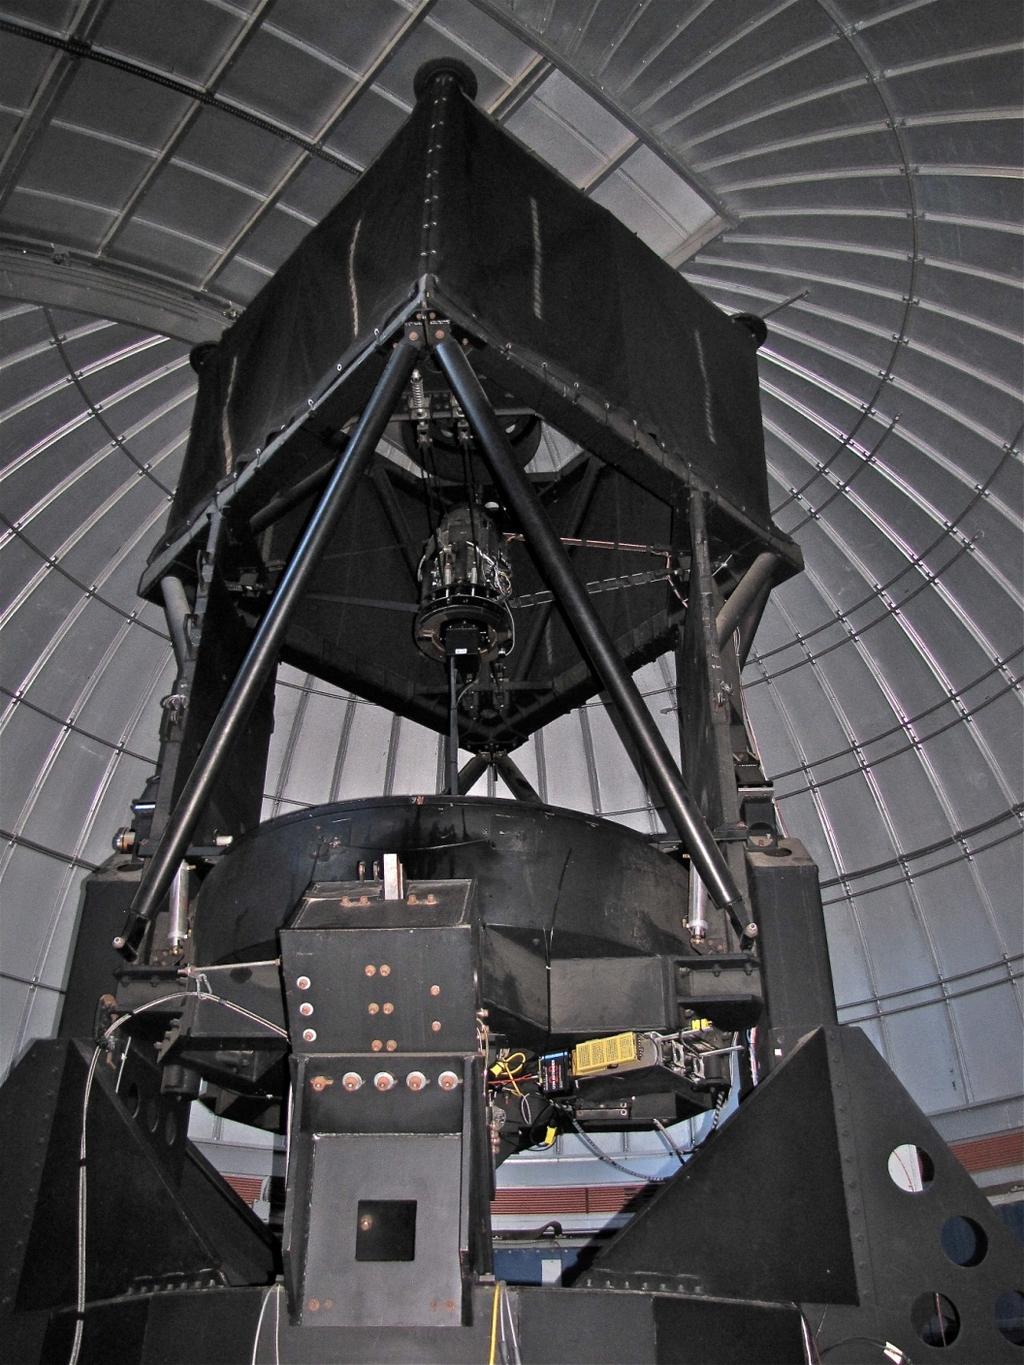 Spacewatch 1.8-meter Telescope on Kitt Peak New CCD in 2011 Oct: FOV = 20 20. Scale = 0.6 arcsec/pixel. Bandpass V+R+I. Fast readout.